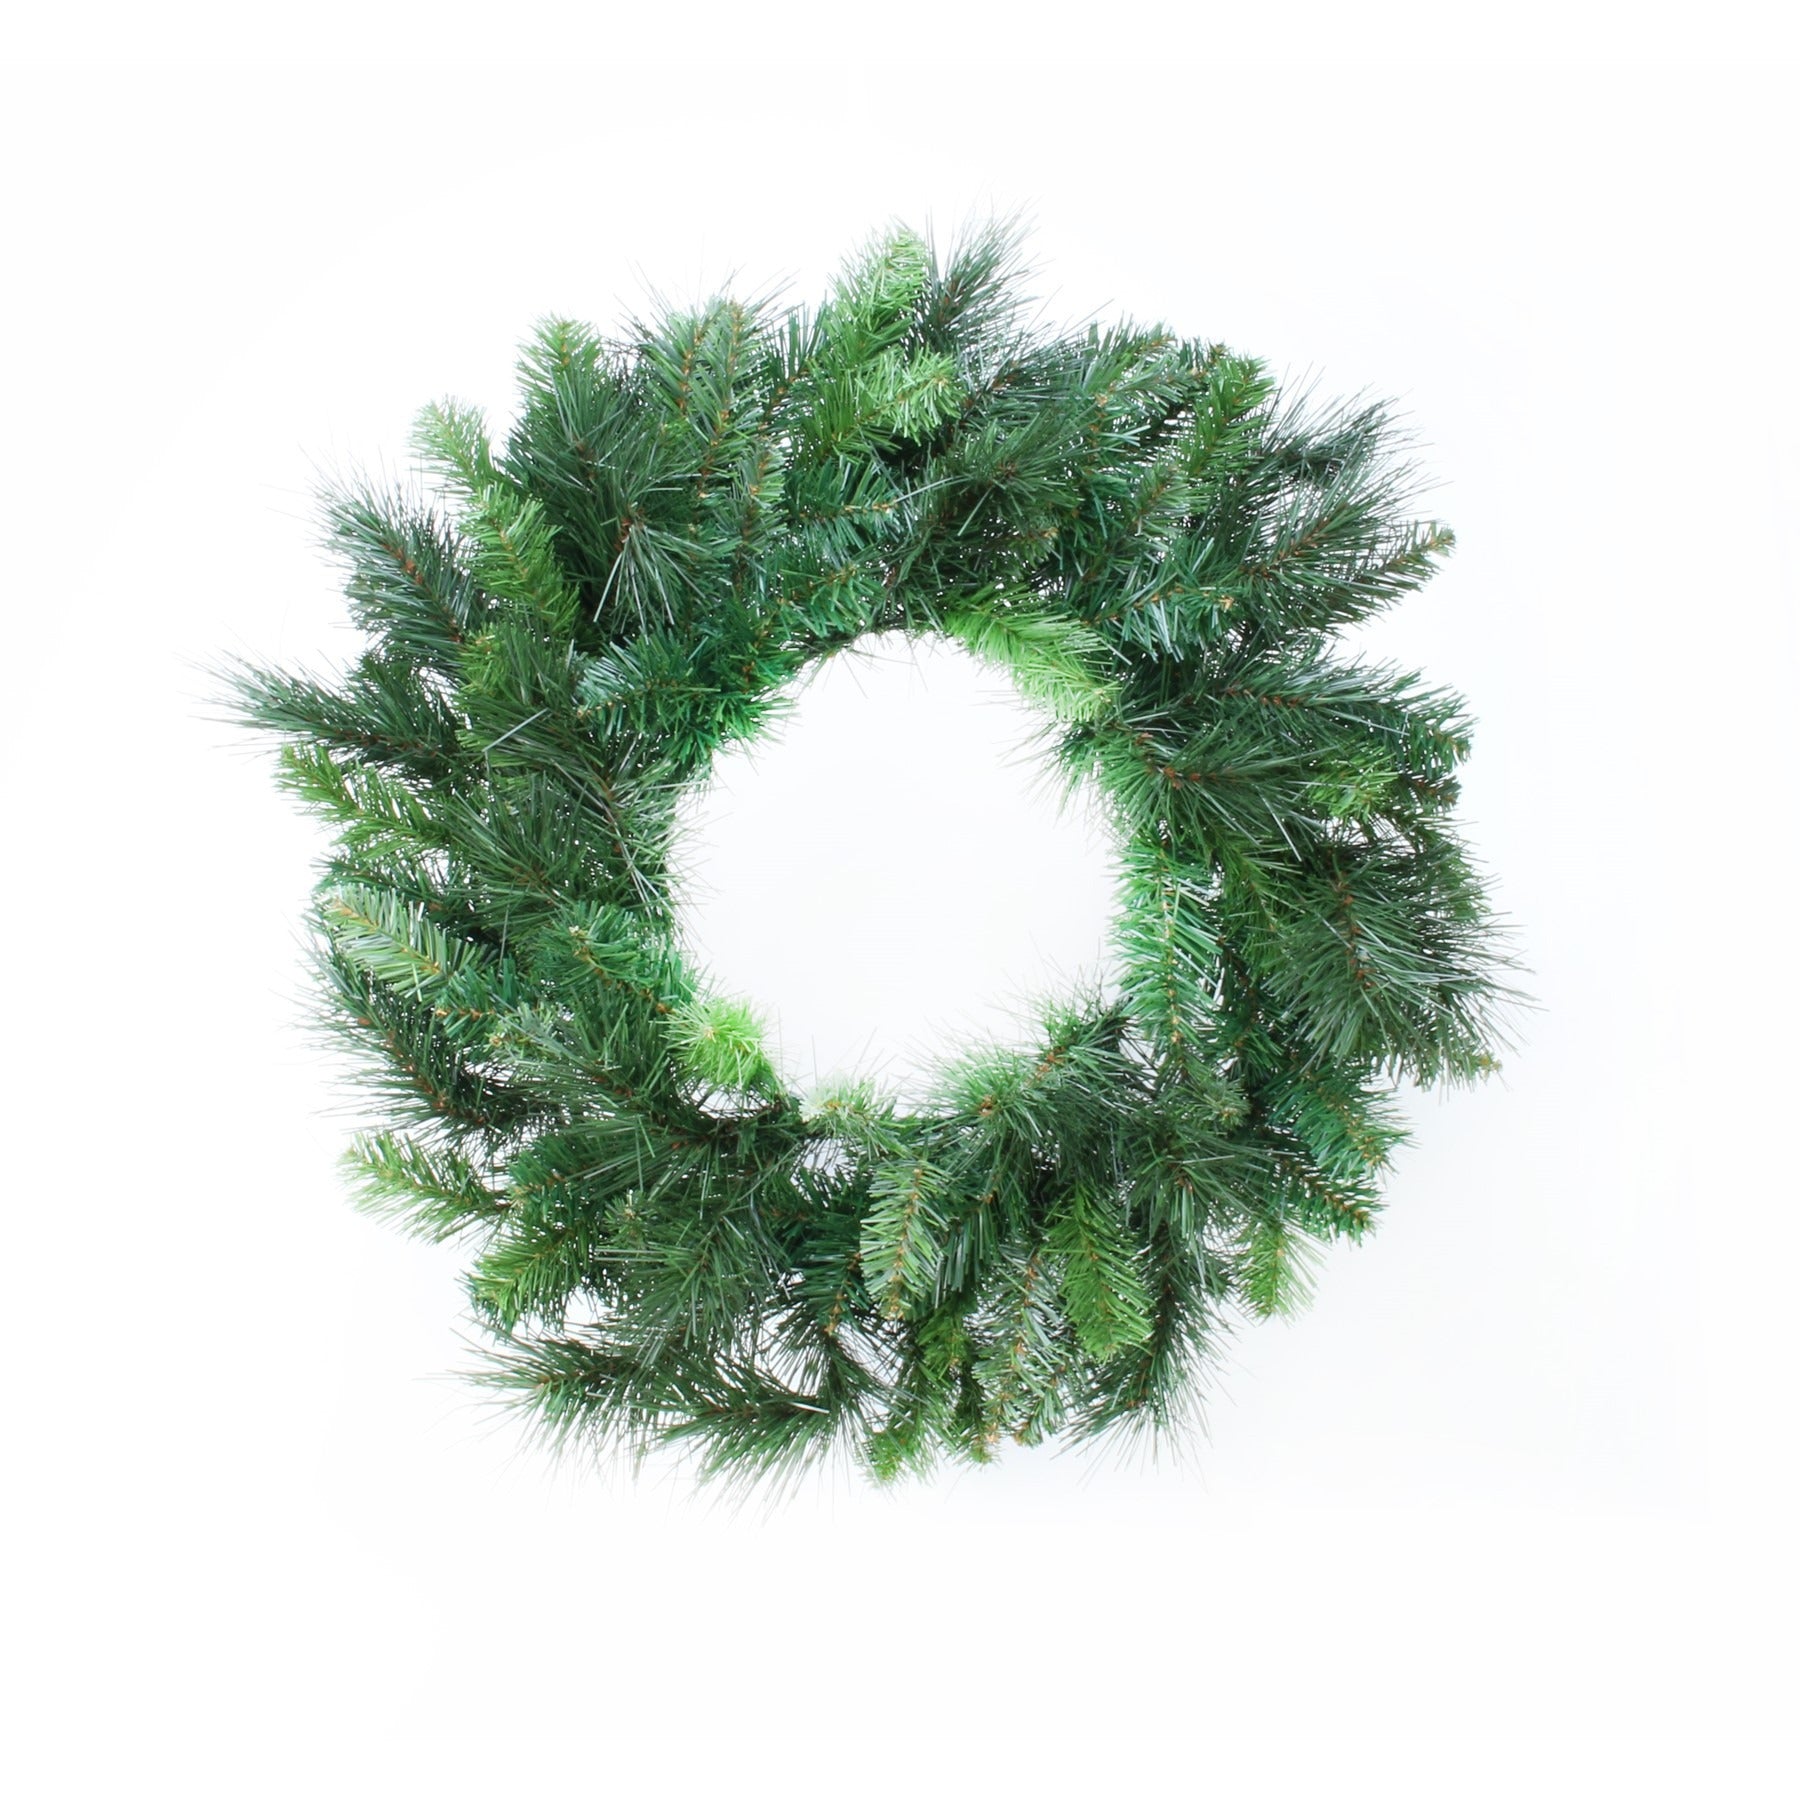 View Deluxe Evergreen Greenery Wreath 50cm information